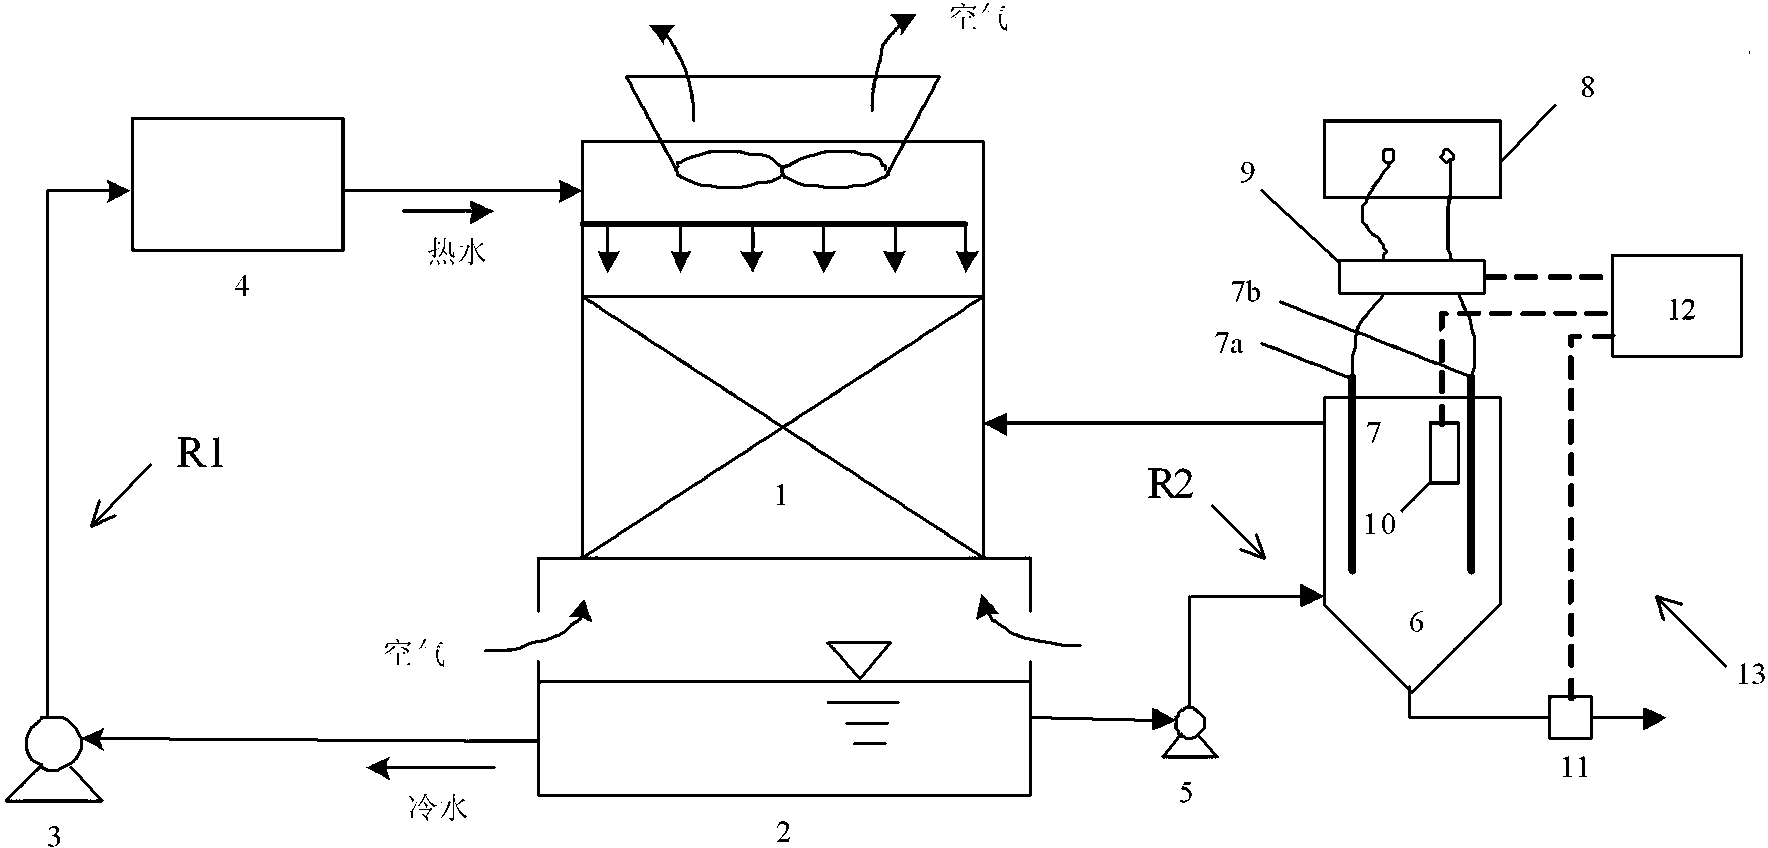 Direct-current electrolytic treatment process and equipment for circulating cooling water